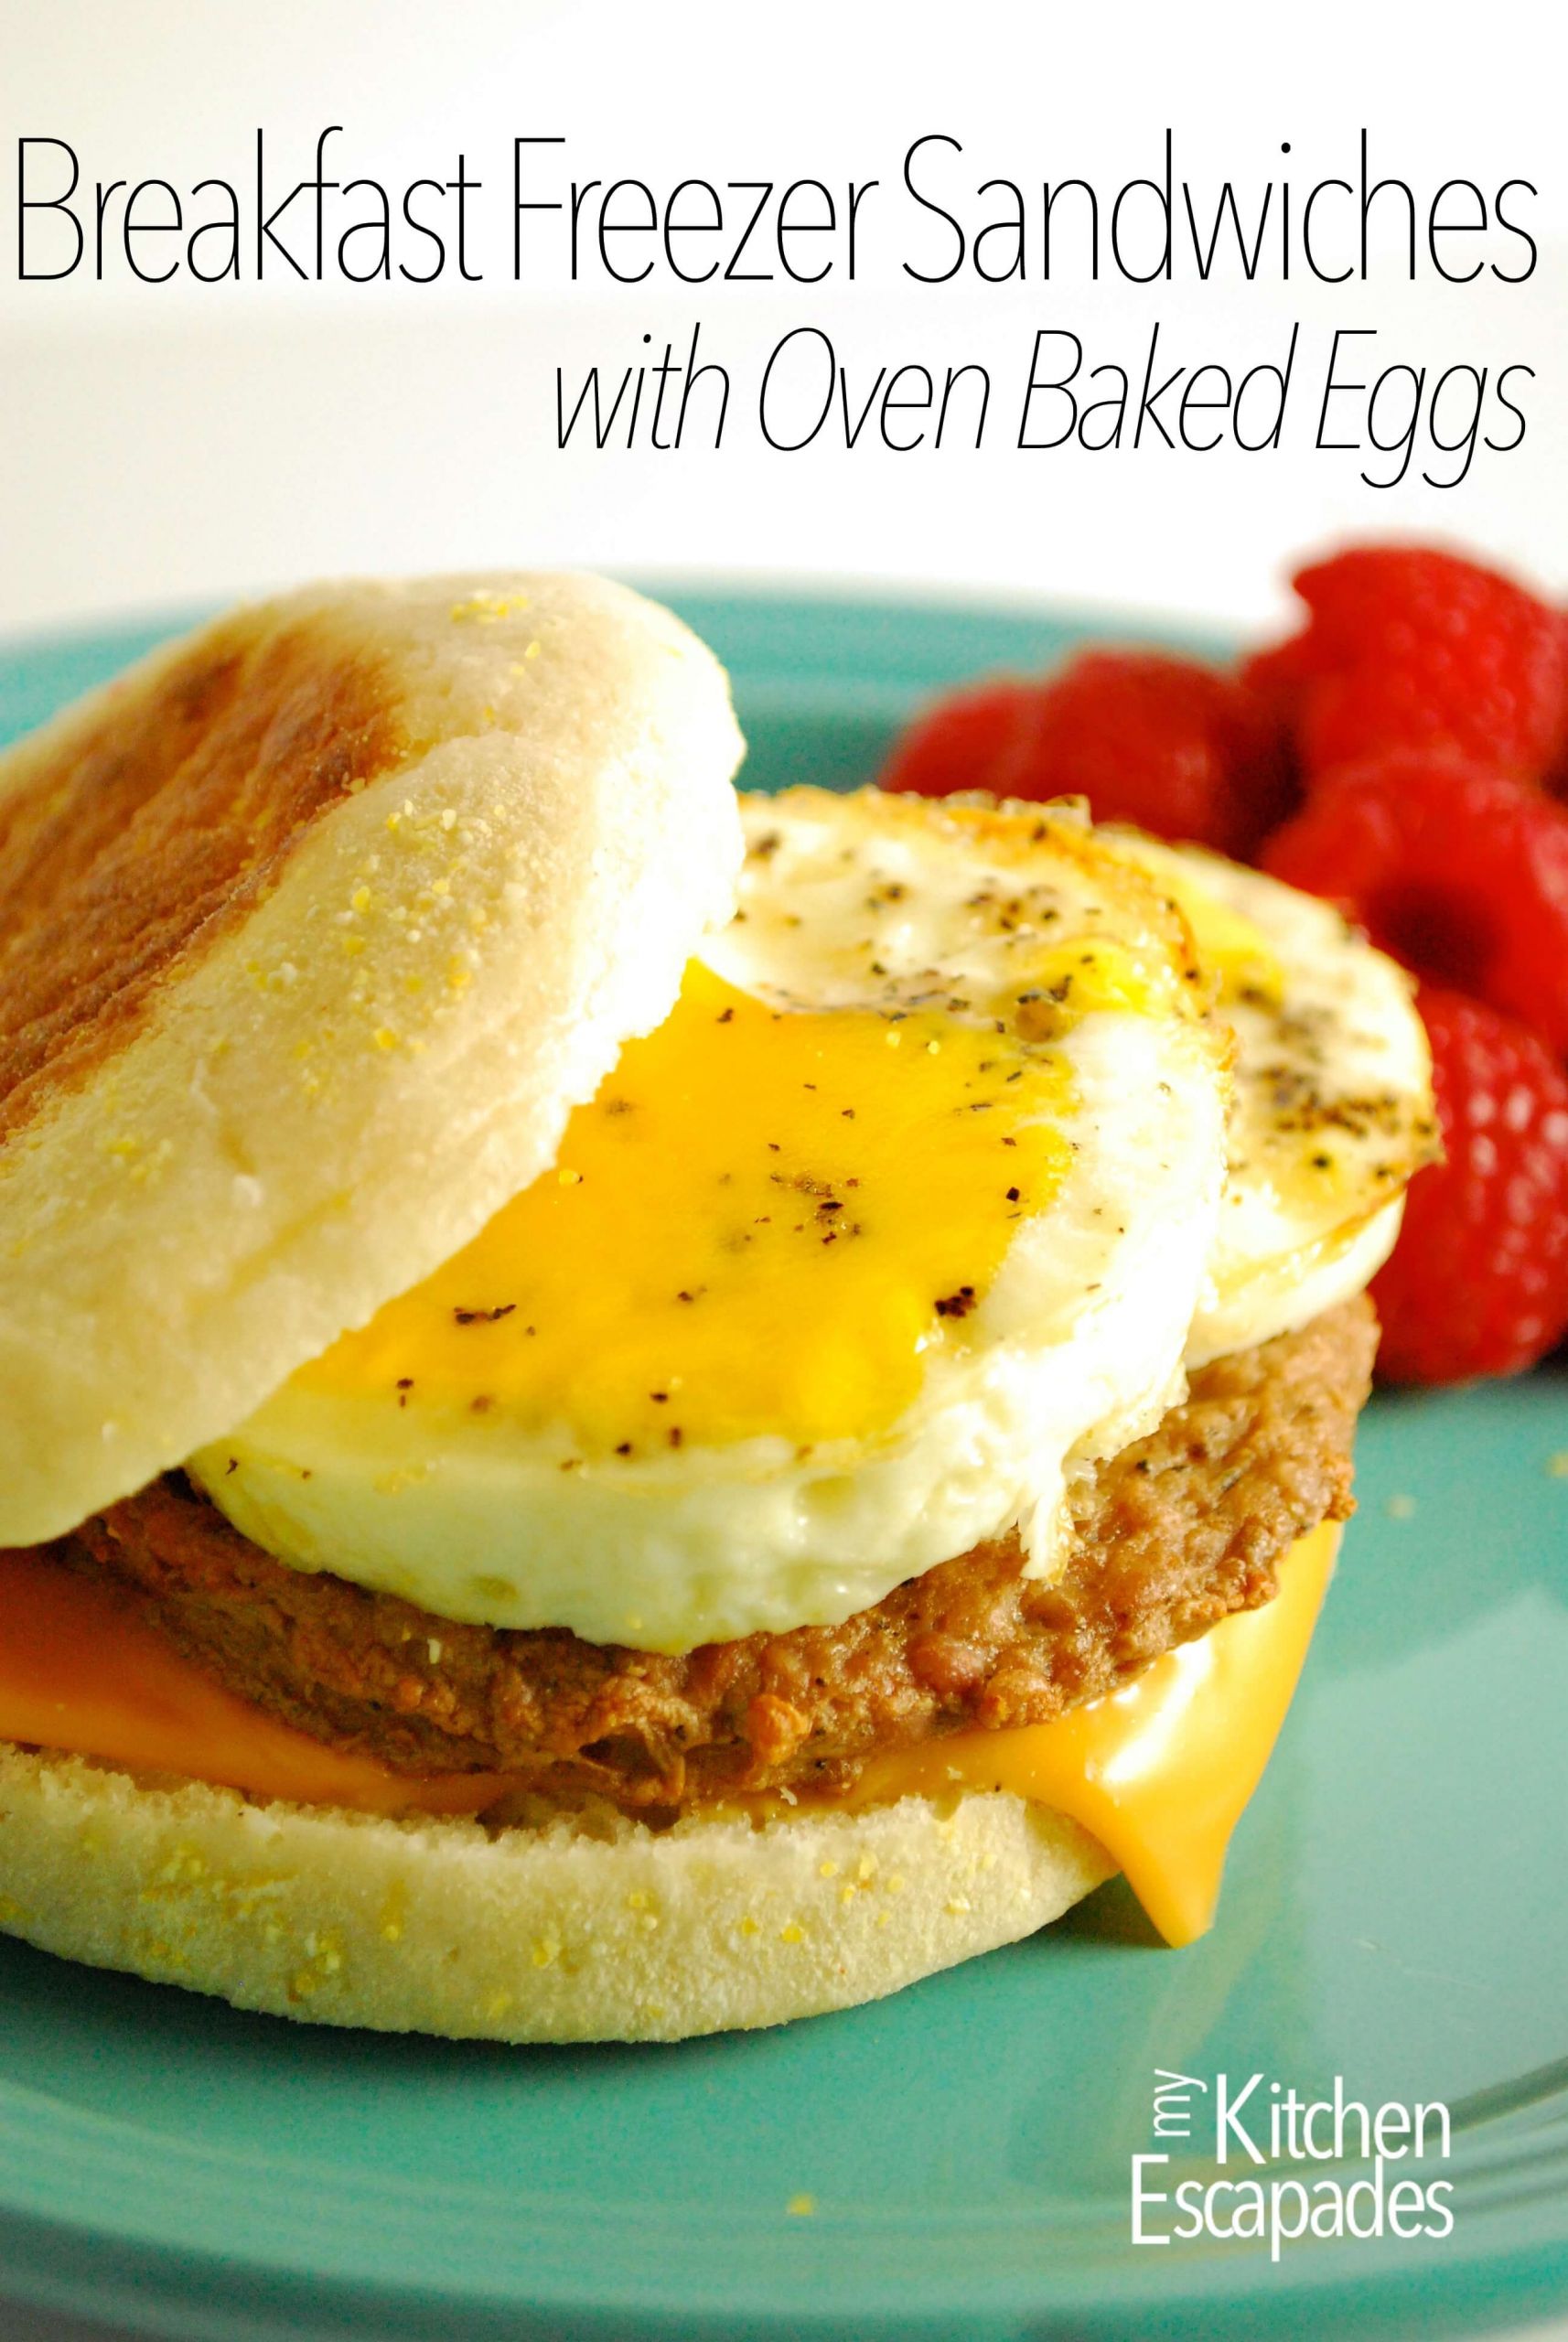 15 Healthy Cooking Eggs In the Oven for Breakfast Sandwiches